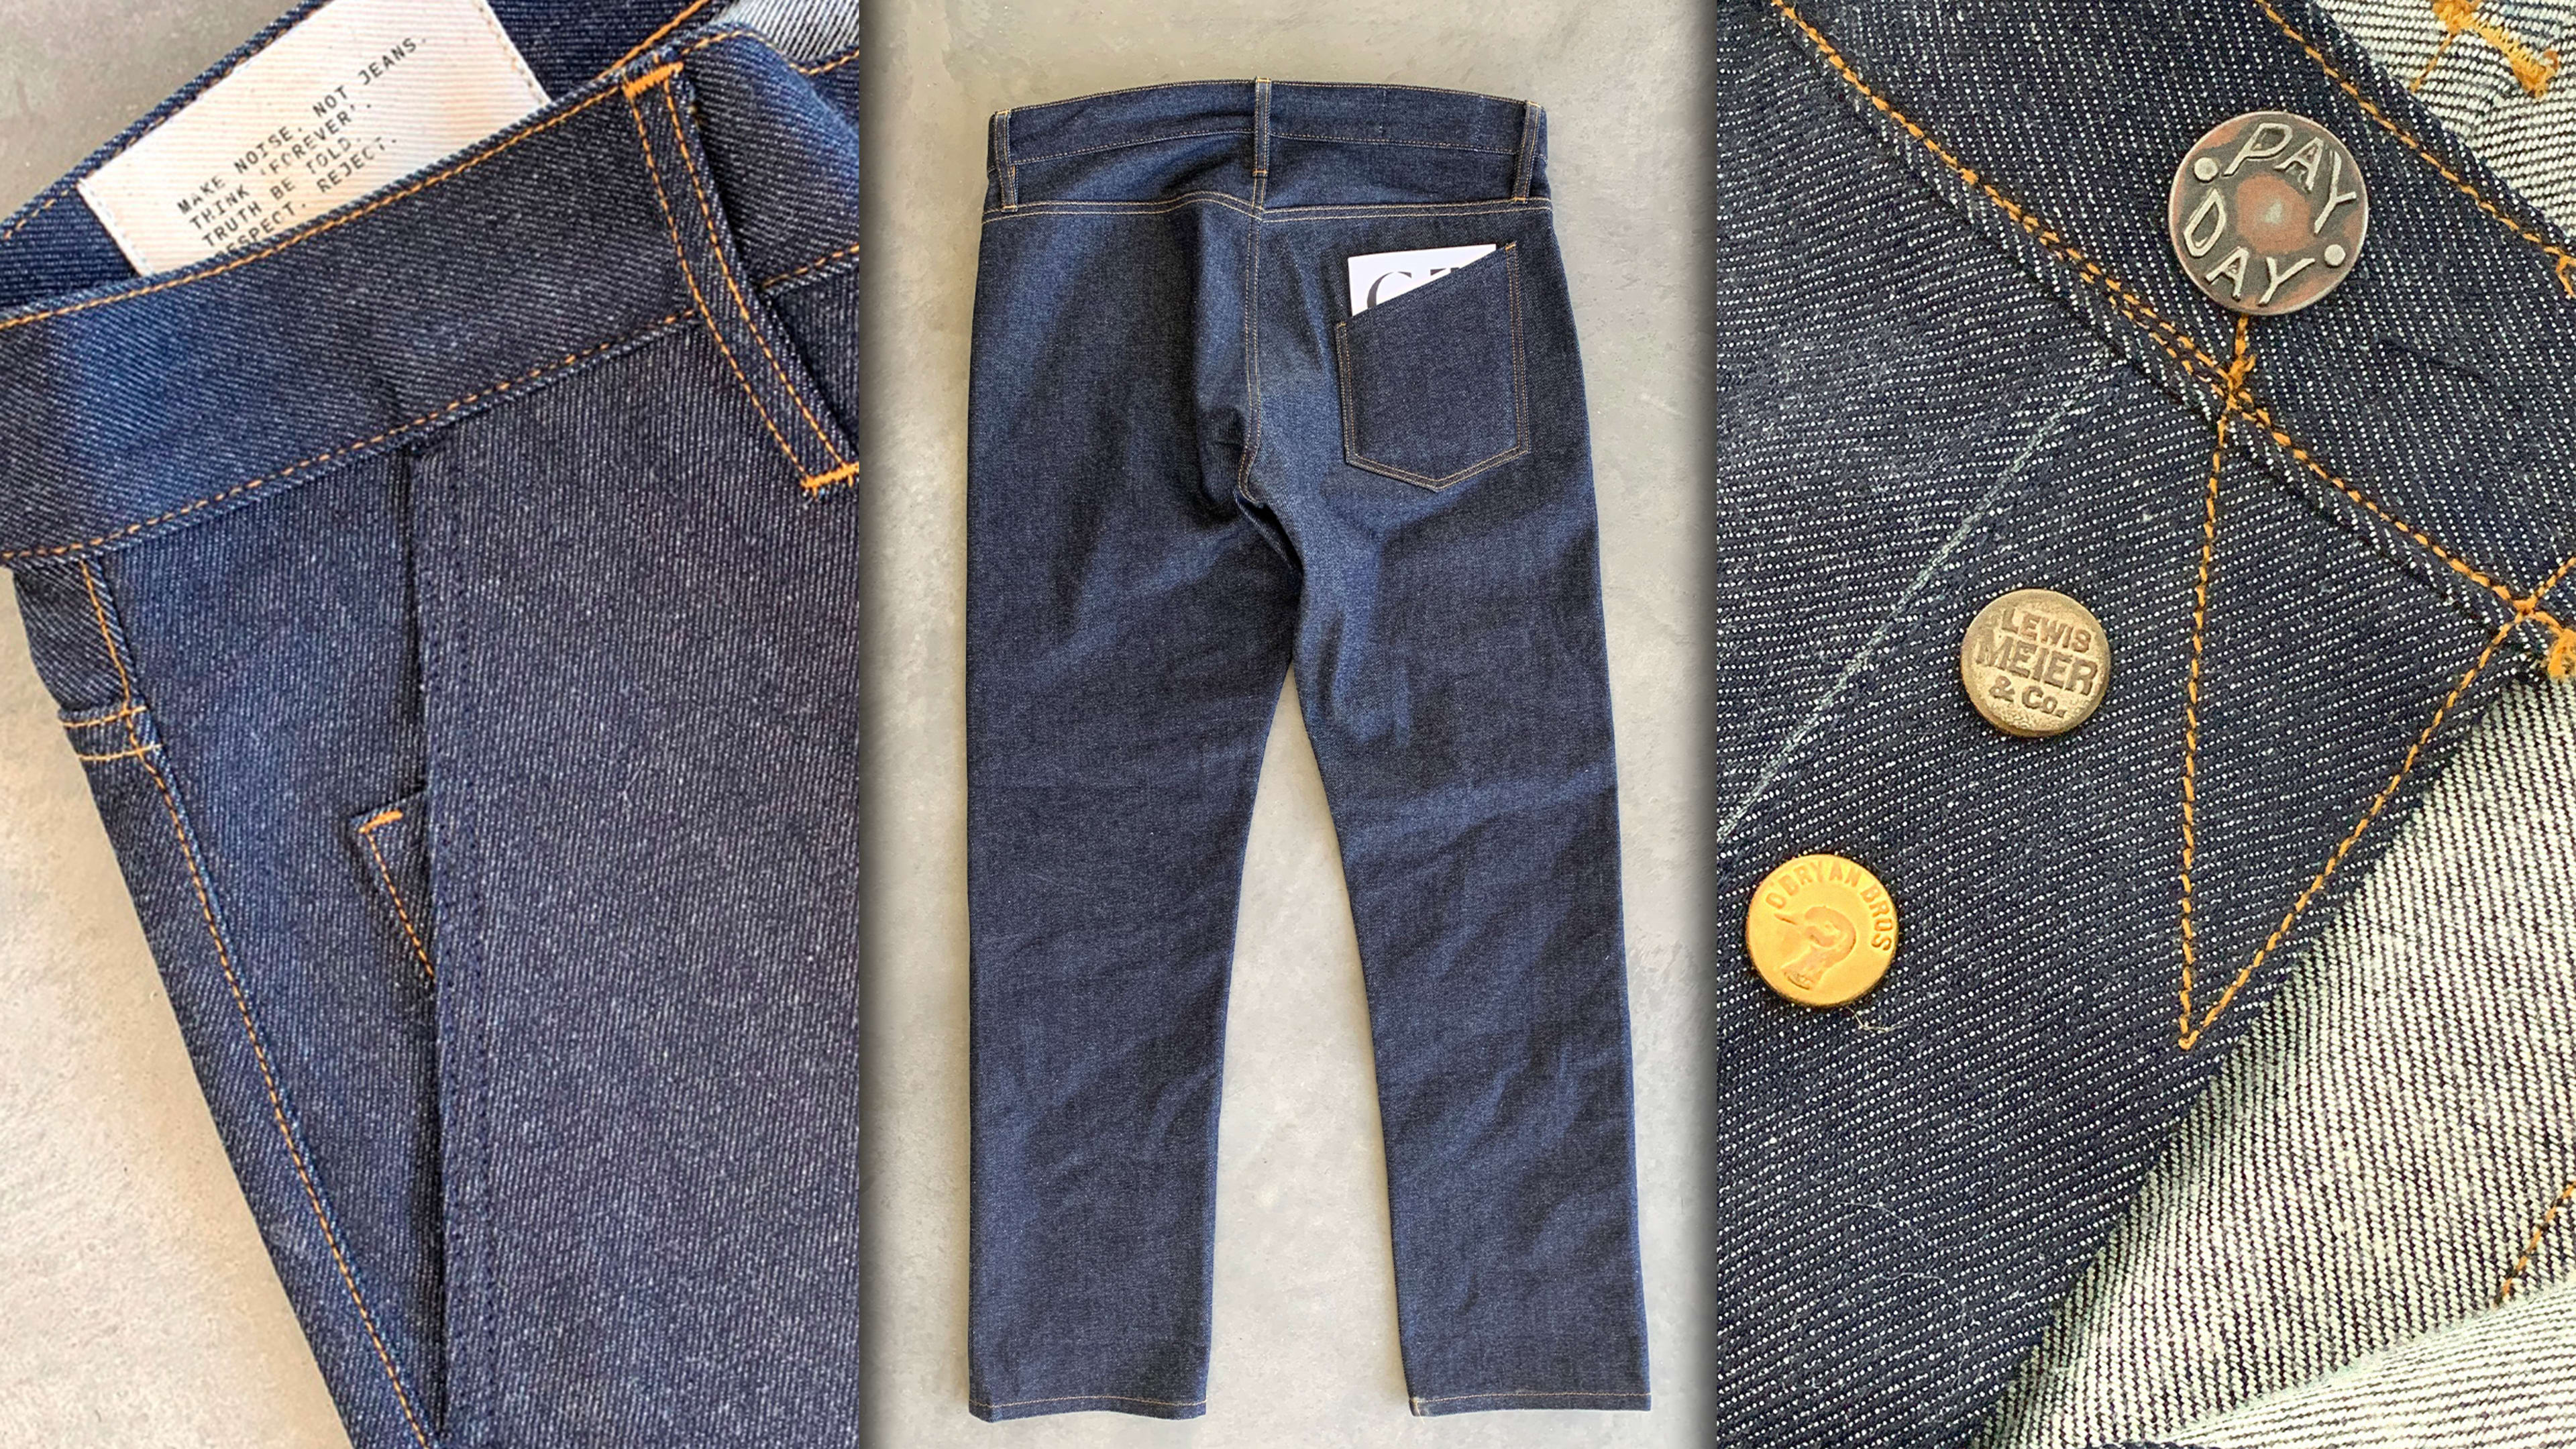 This is what jeans would look like if Dieter Rams designed them